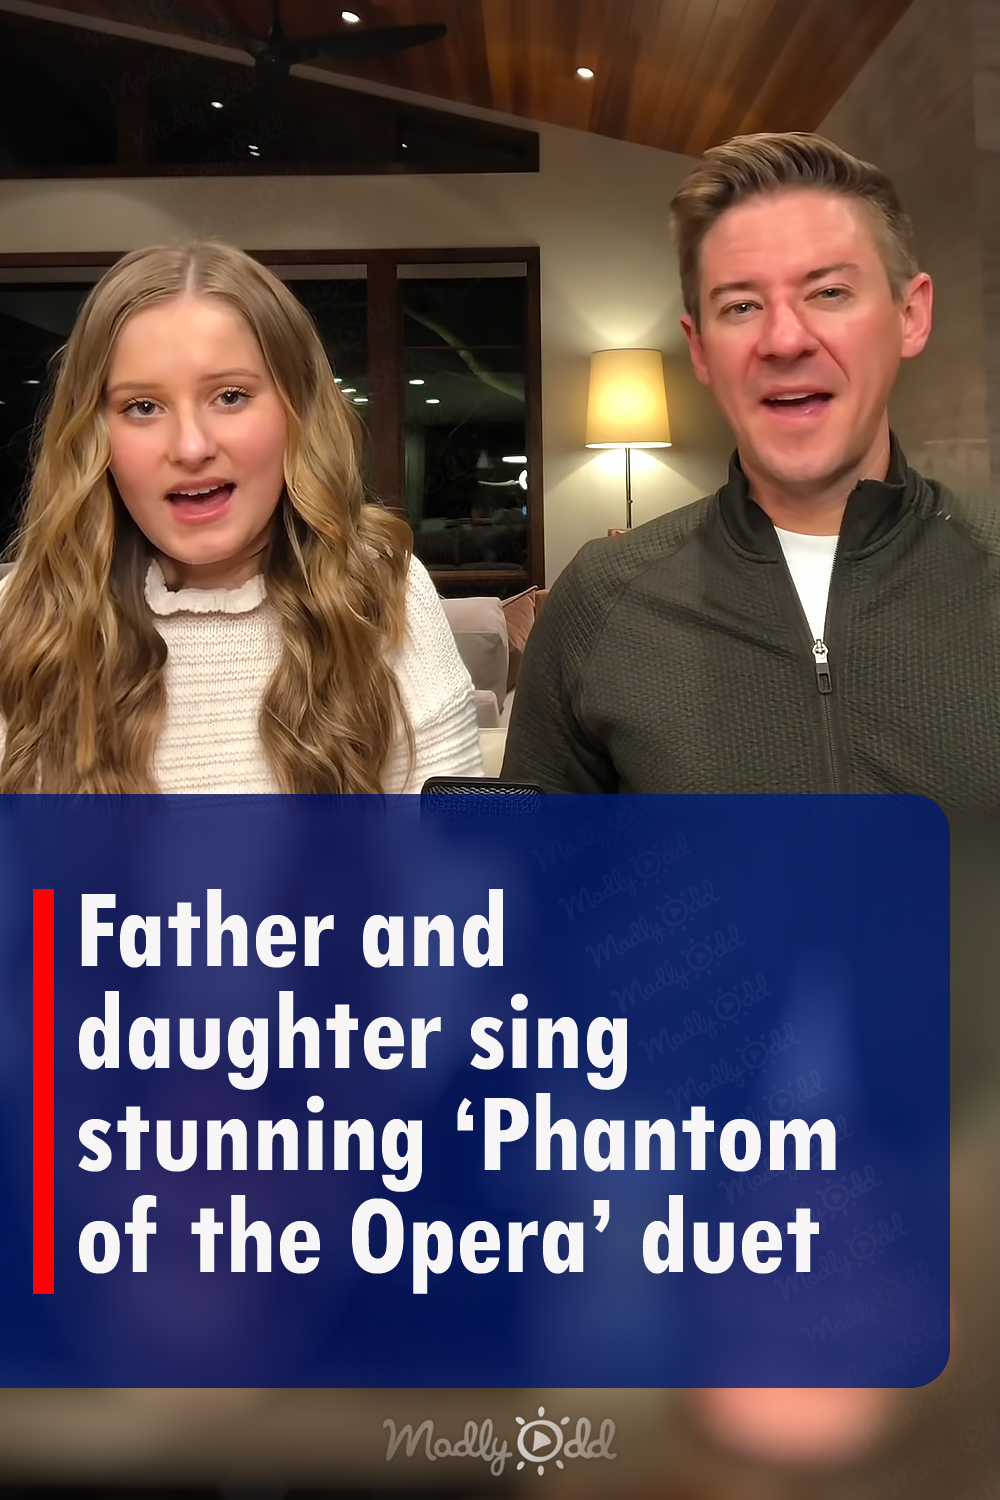 Father and daughter sing stunning ‘Phantom of the Opera’ duet